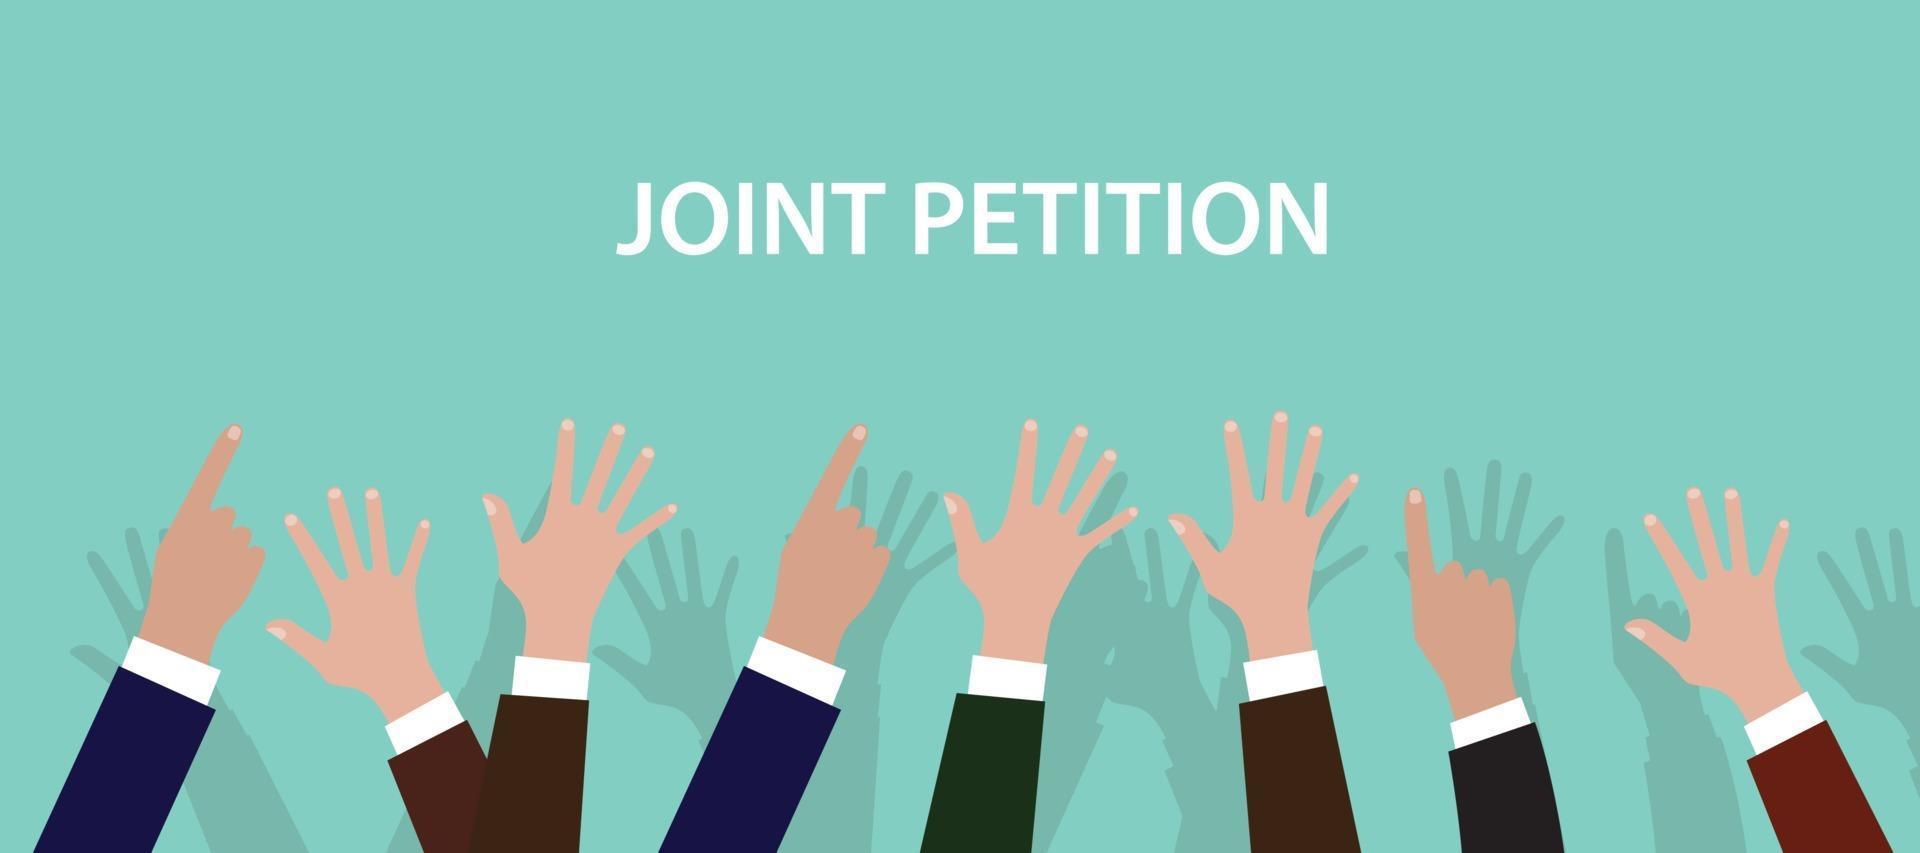 joint petition concept illustration with hands up to the air vector